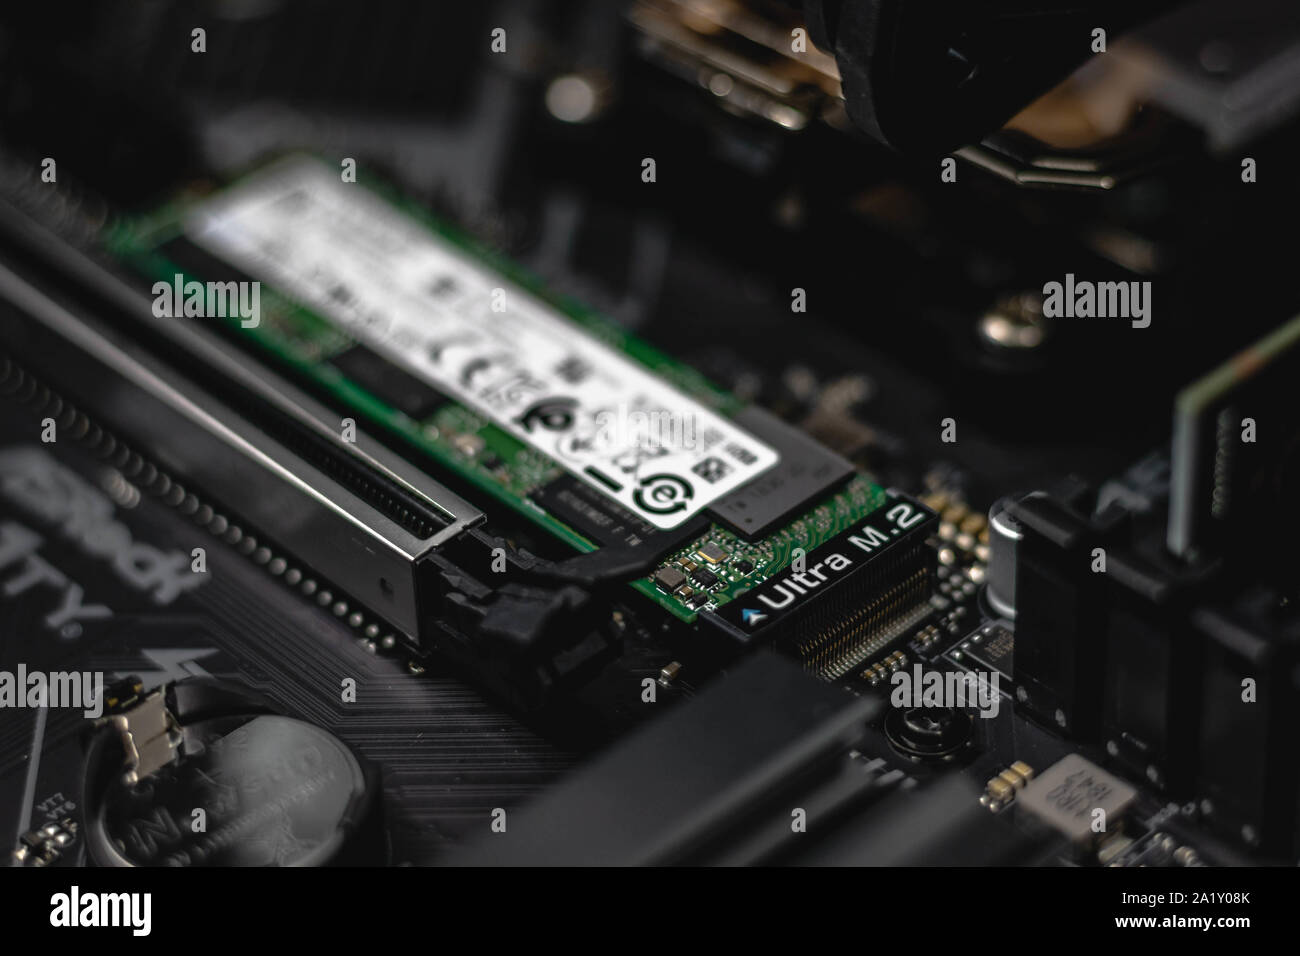 Ultra M.2 NVMe SSD Flash Drive mounted on a Mainboard/Motherboard Stock  Photo - Alamy